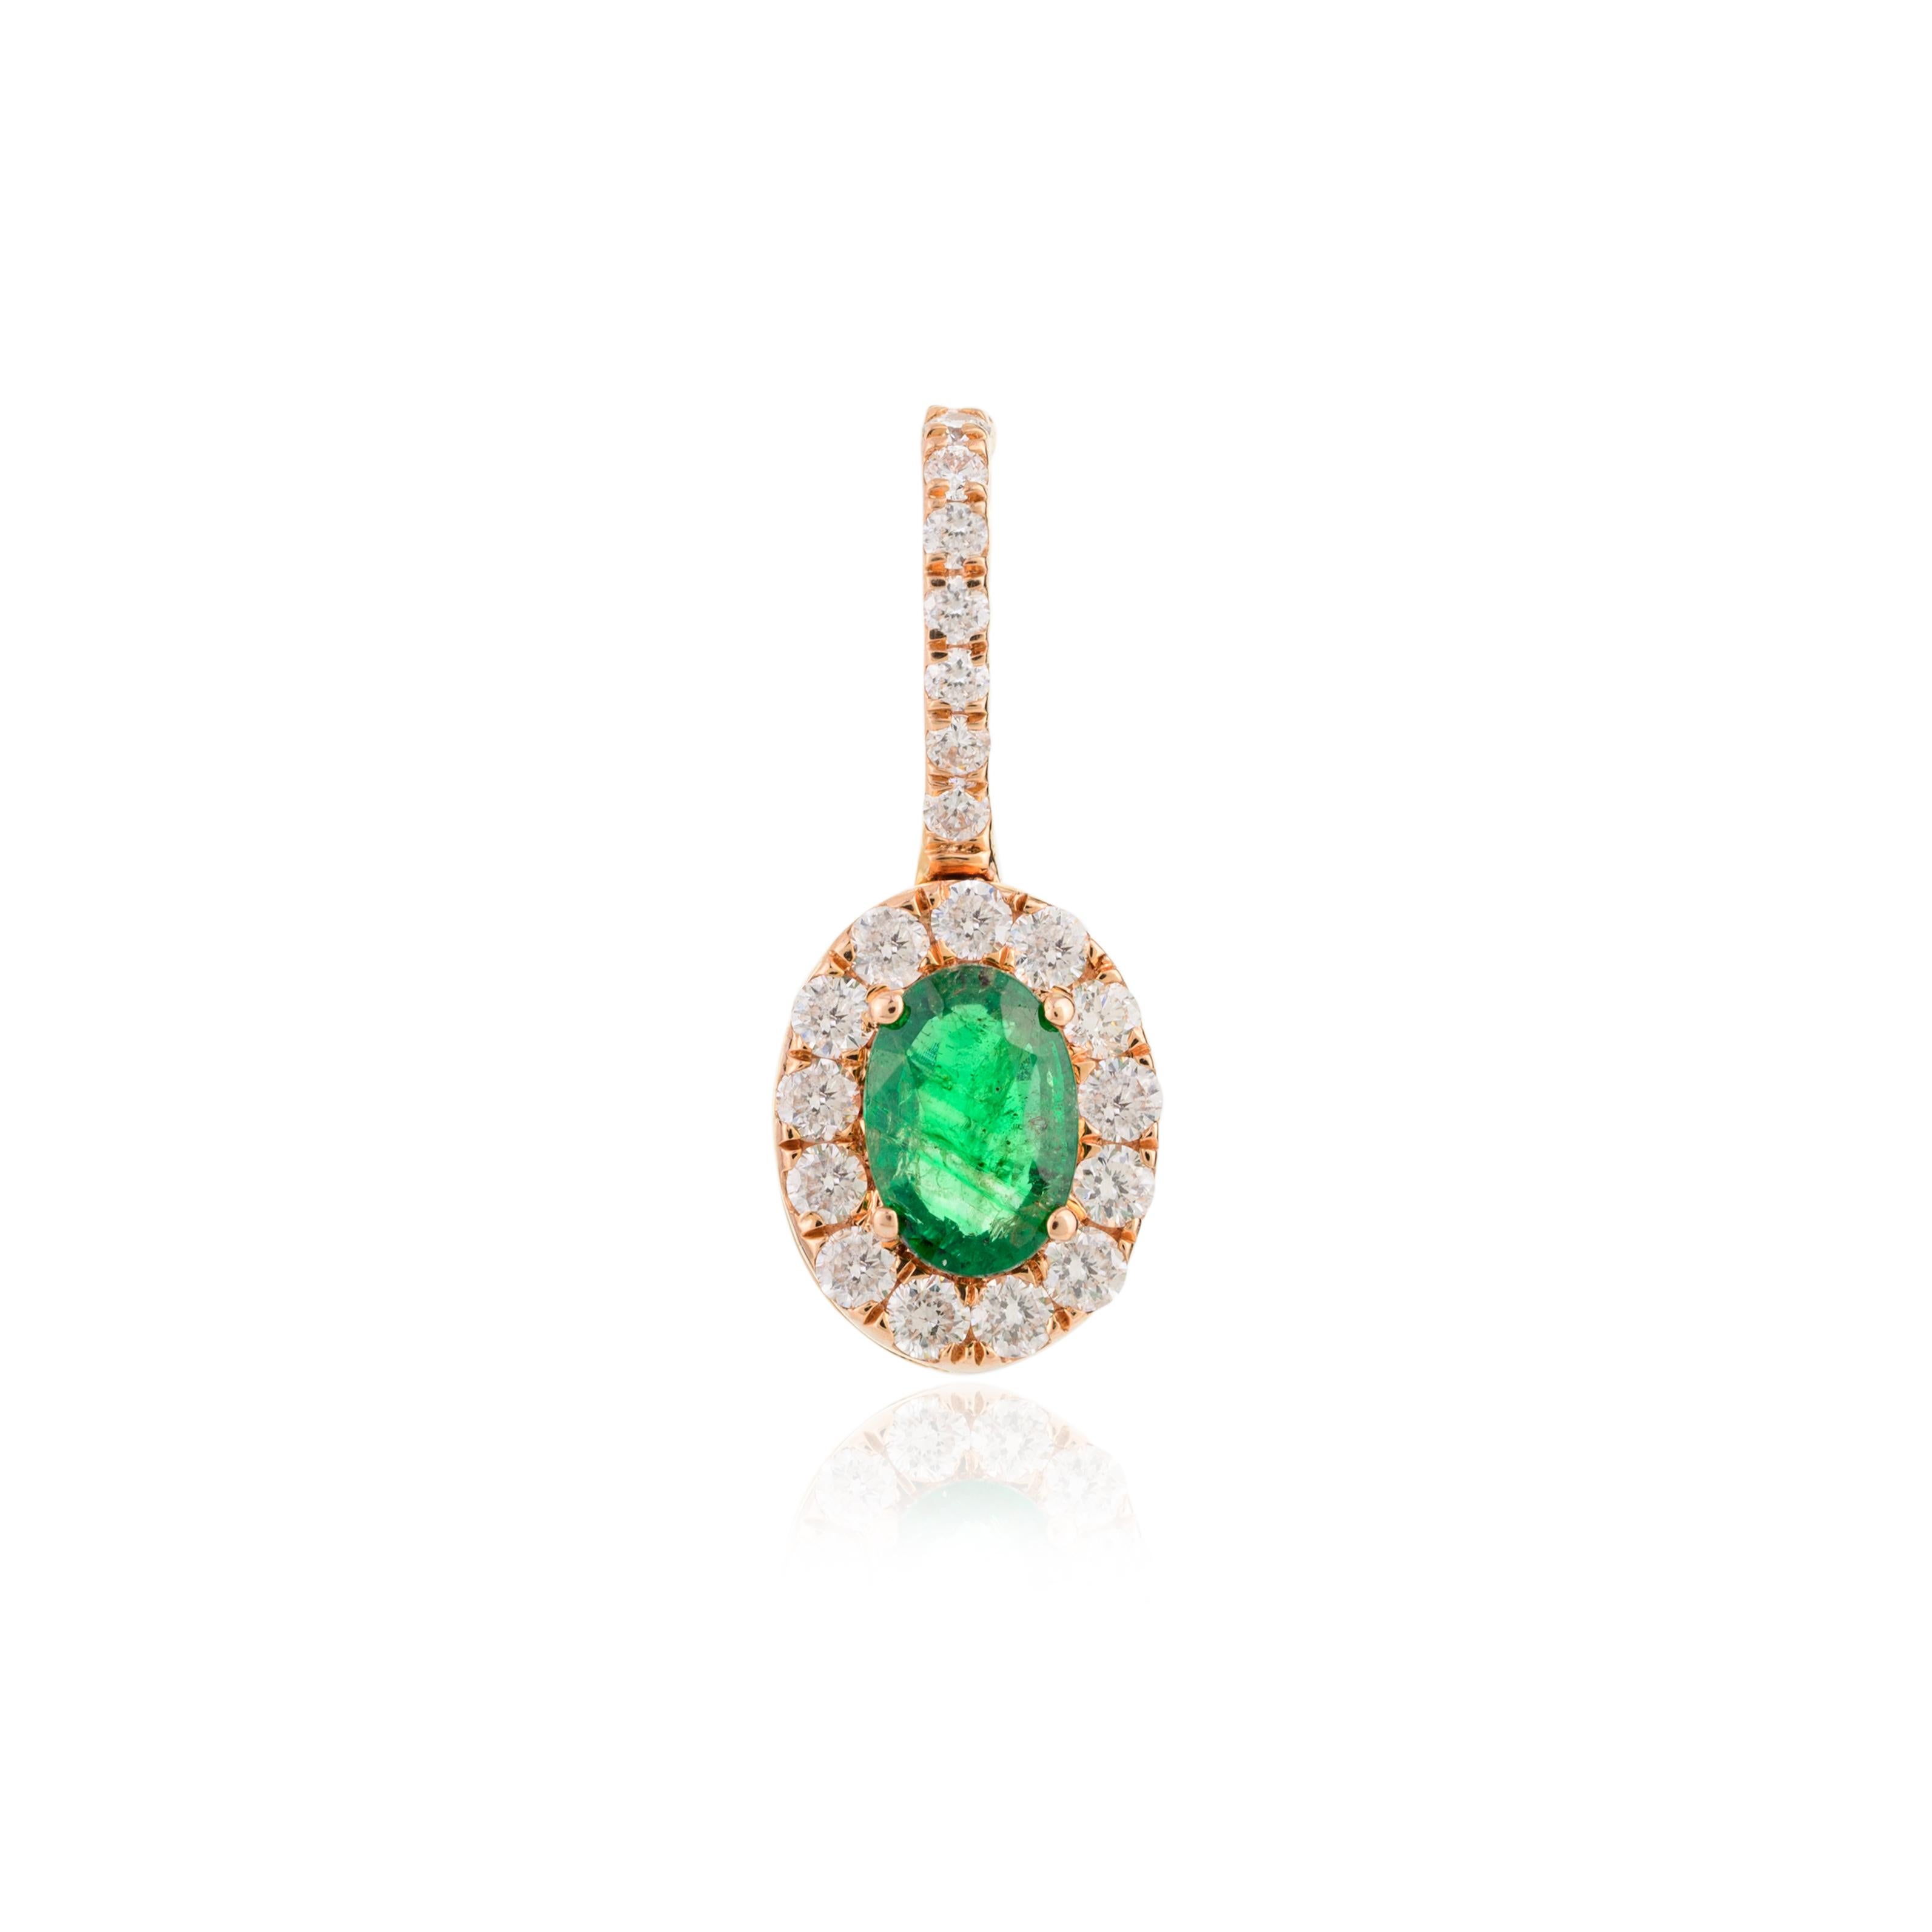 Dainty Certified Emerald Diamond Halo Pendant in 18K Gold studded with oval cut emerald and halo of diamonds. This stunning piece of jewelry instantly elevates a casual look or dressy outfit. 
Emerald enhances the intellectual capacity of the